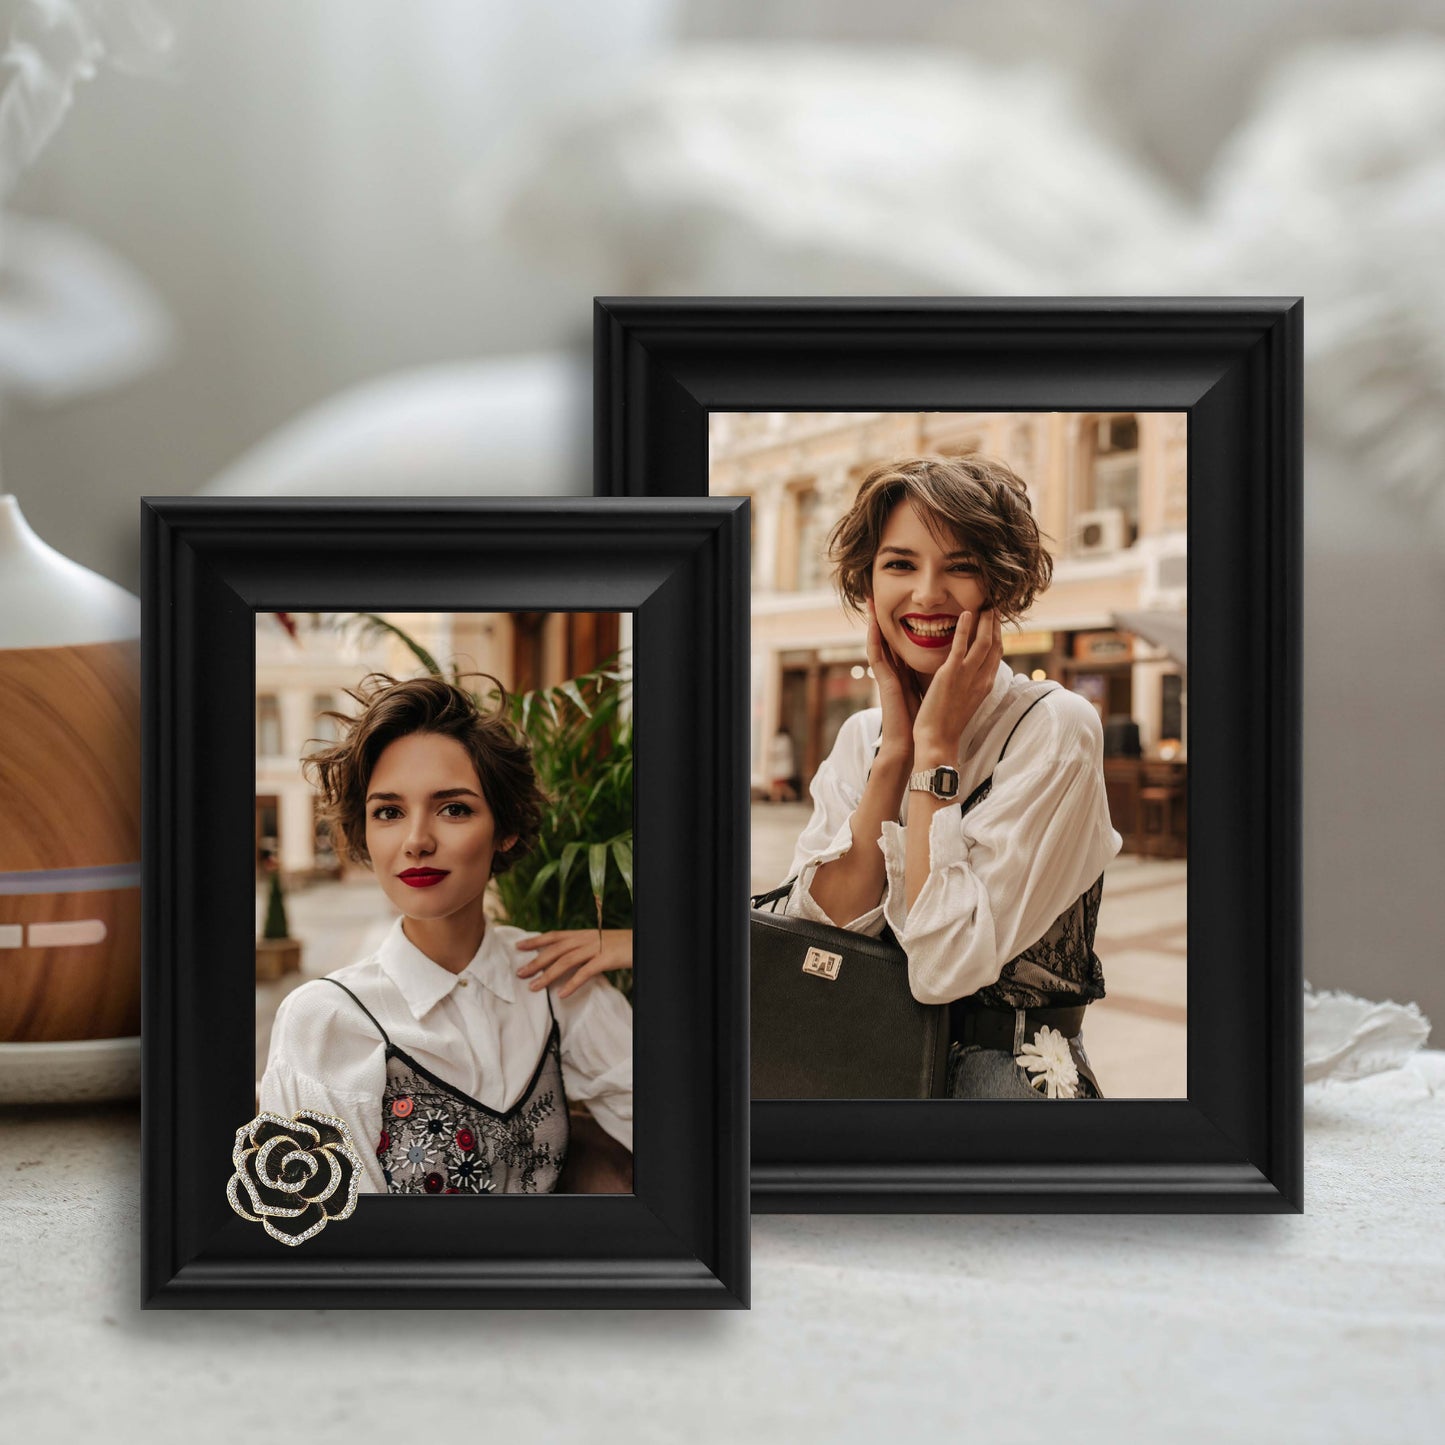 Dotride 5x7 & 4x6 Picture Frame with a Decoration 2 Pack, Photo Frame with a Detachable Flowers Ornament for Wall and Tabletop Display, Wood Phoframe with Acrylic Panel, Black